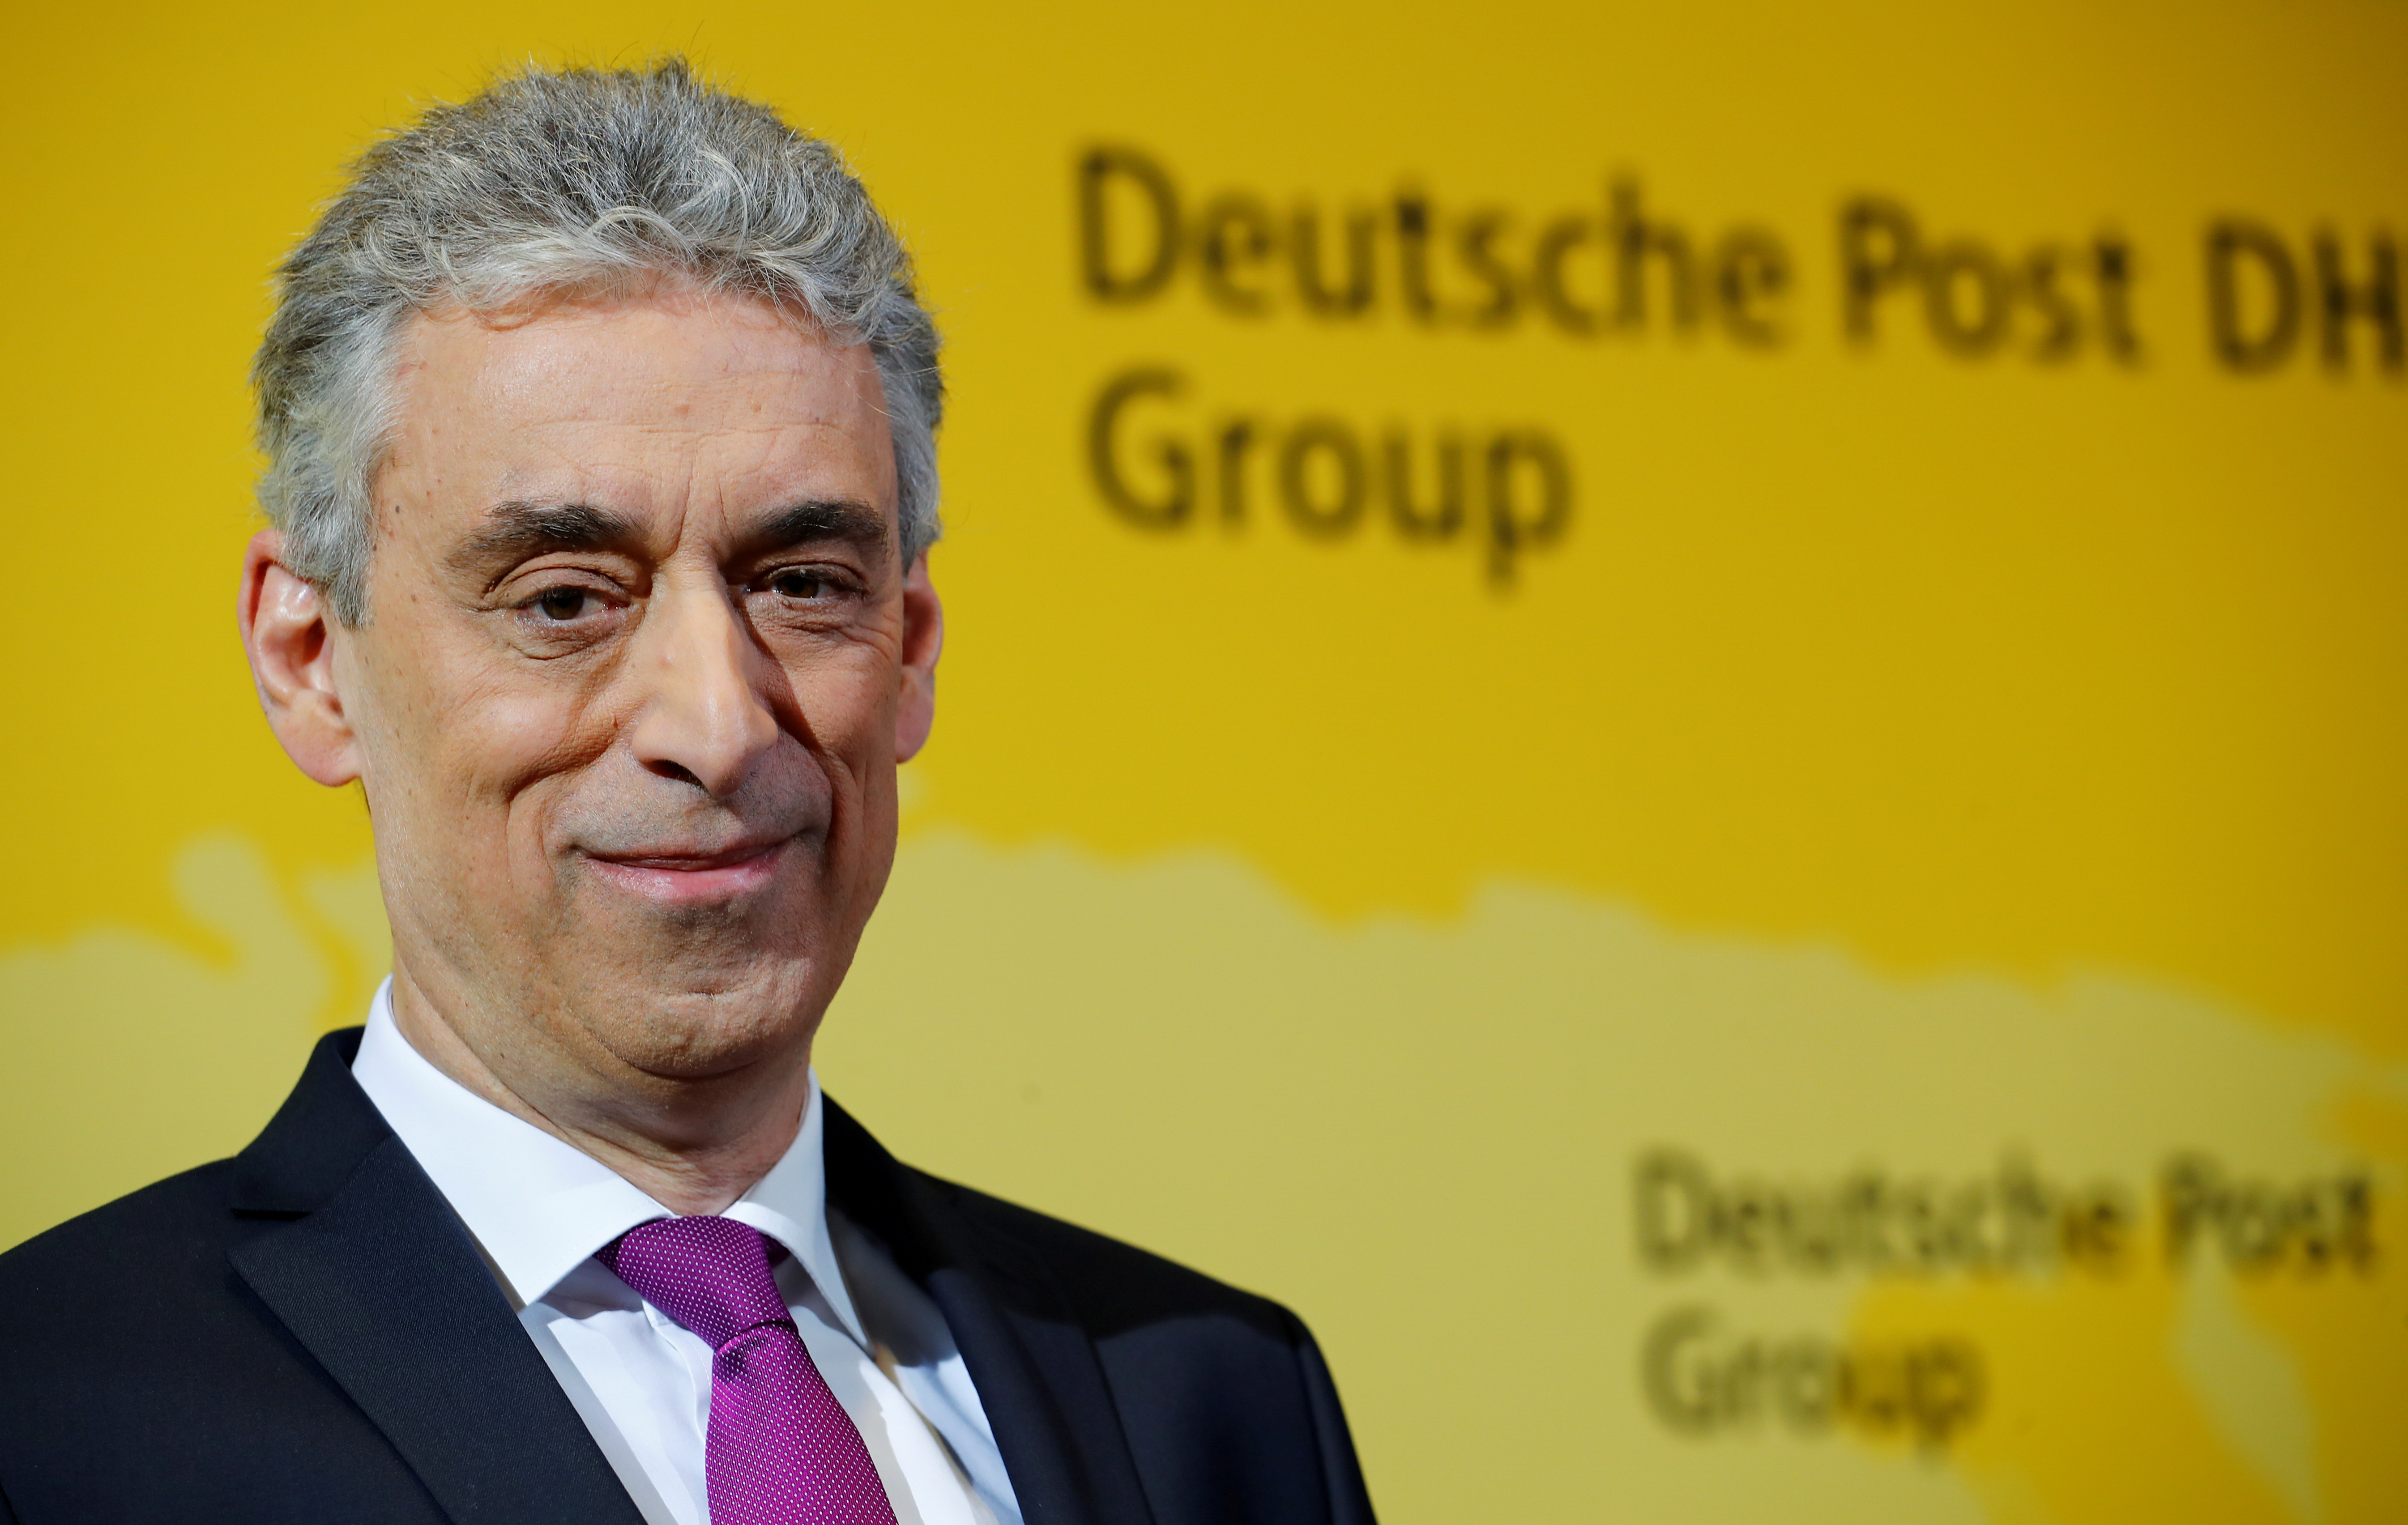 Frank Appel, Chief Executive Officer of German postal and logistics group Deutsche Post DHL